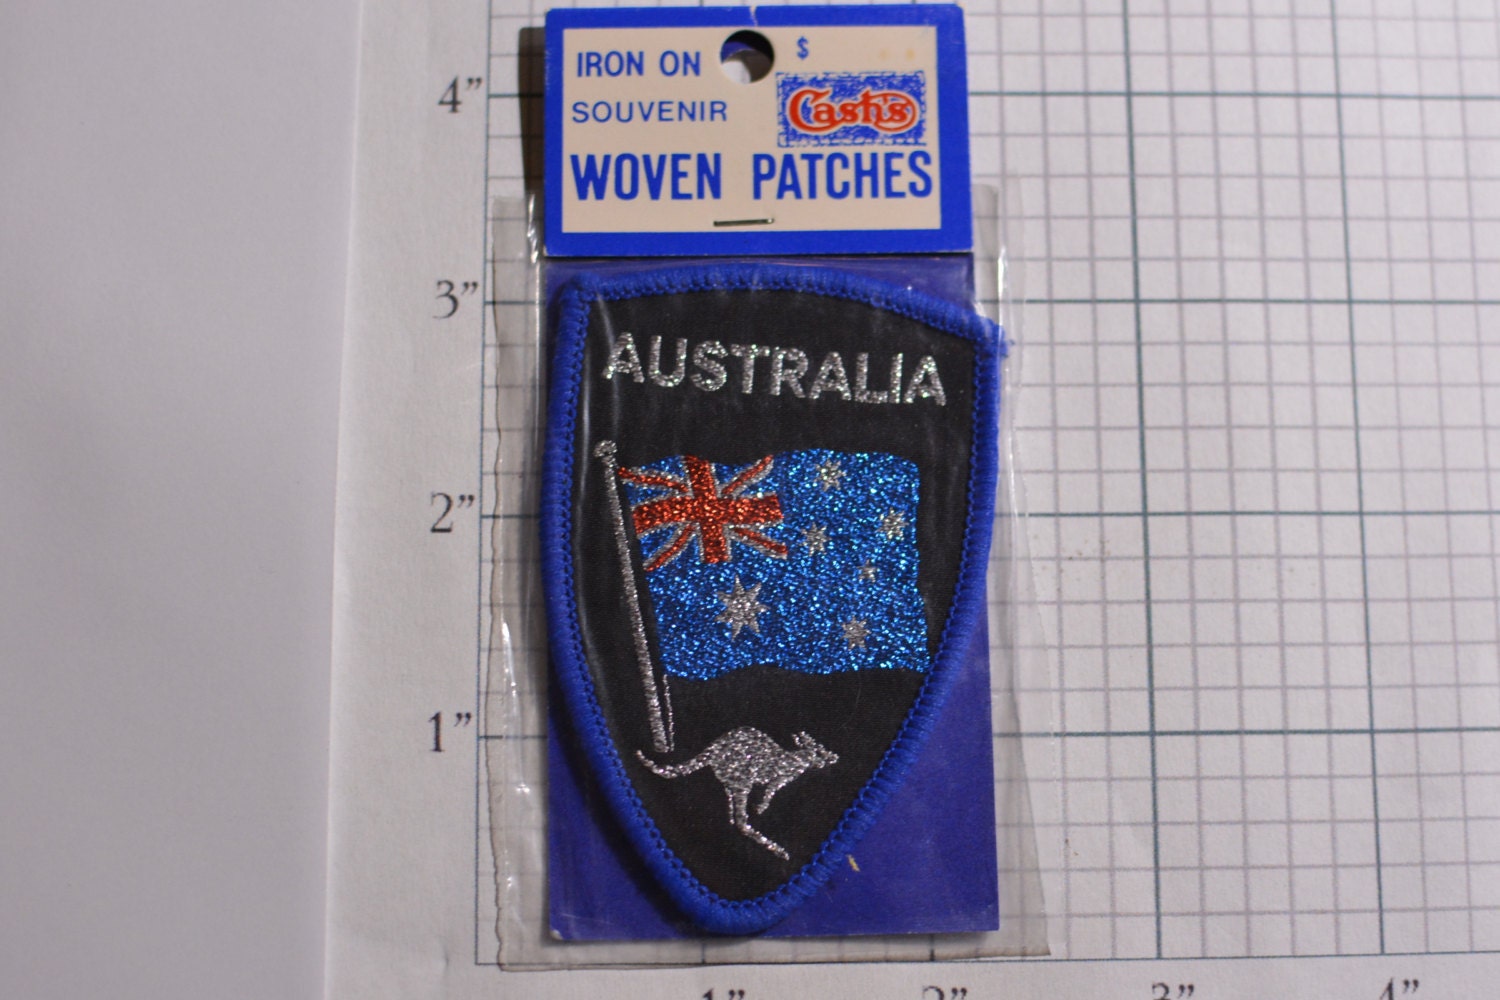 Patch, Embroidered Patch (Iron-On or Sew-On), USA Vintage Flag Patch United  States, 4 x 2